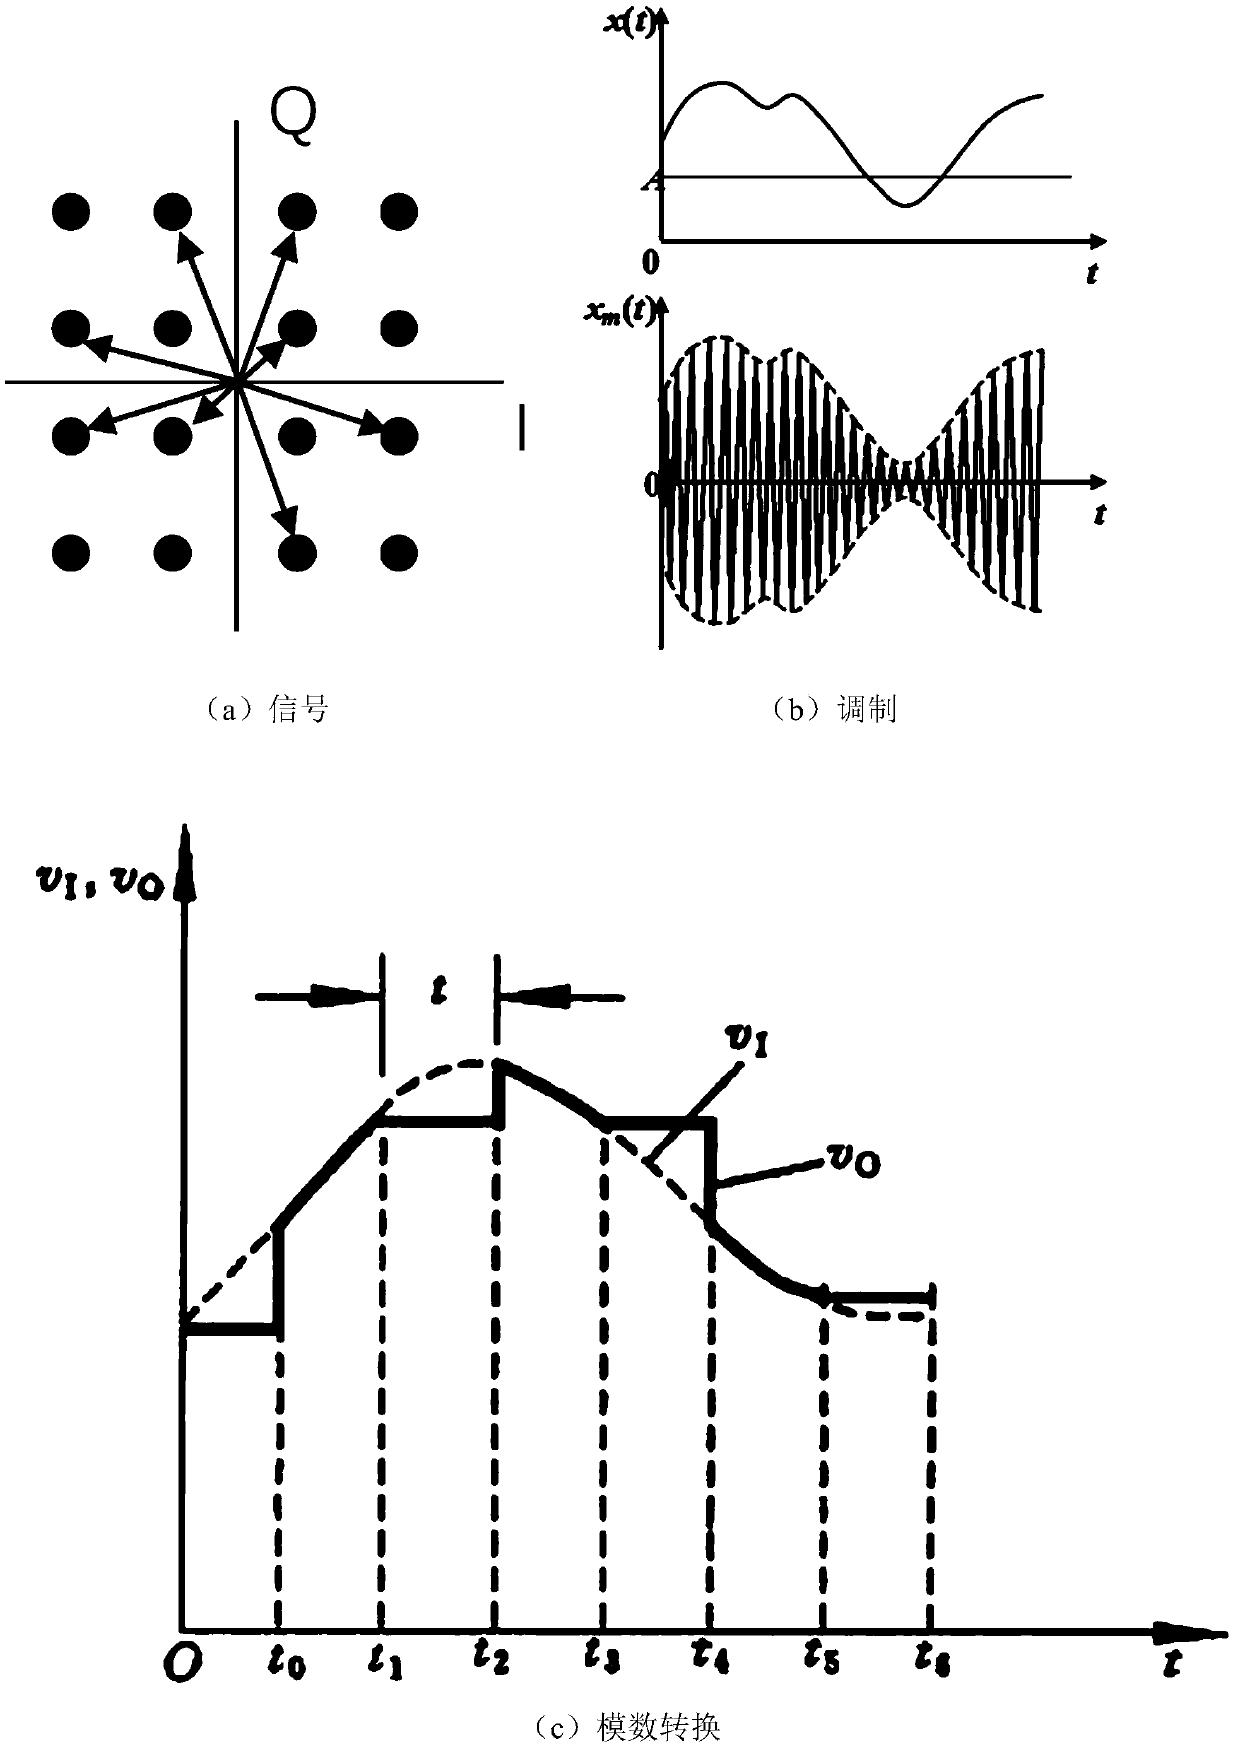 Electromagnetic signal identification method and device for constructing graph convolutional network based on implicit knowledge